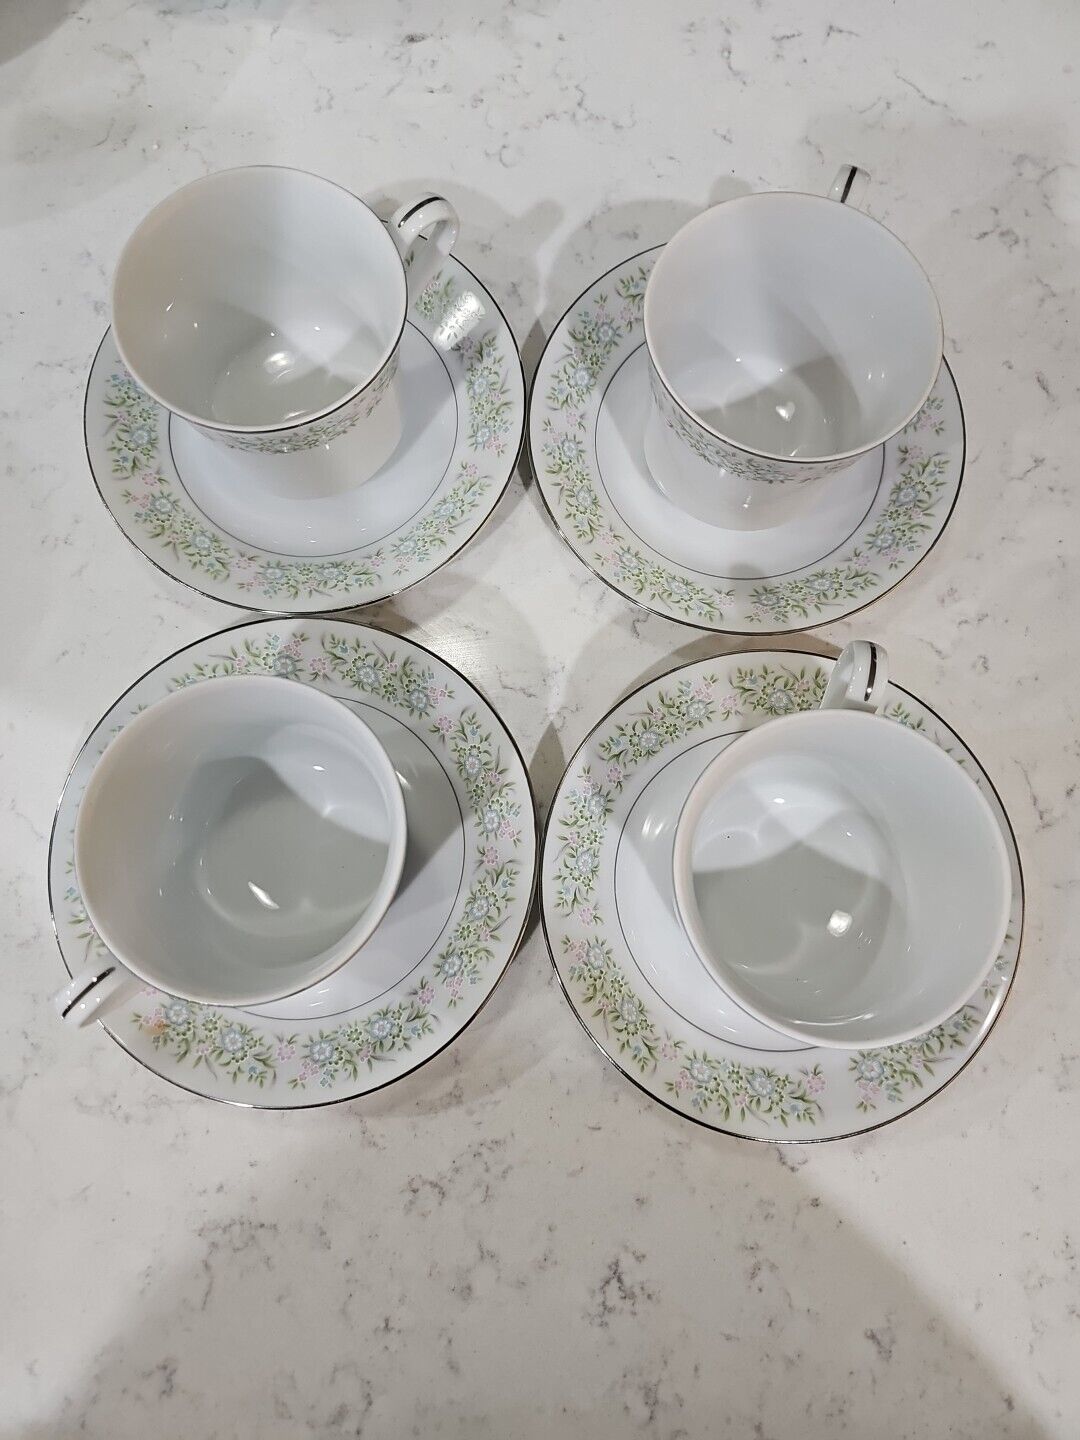 Taihei Springtime China Lot Of 4 Coffee Cups With Saucers set Floral Silver Rim 